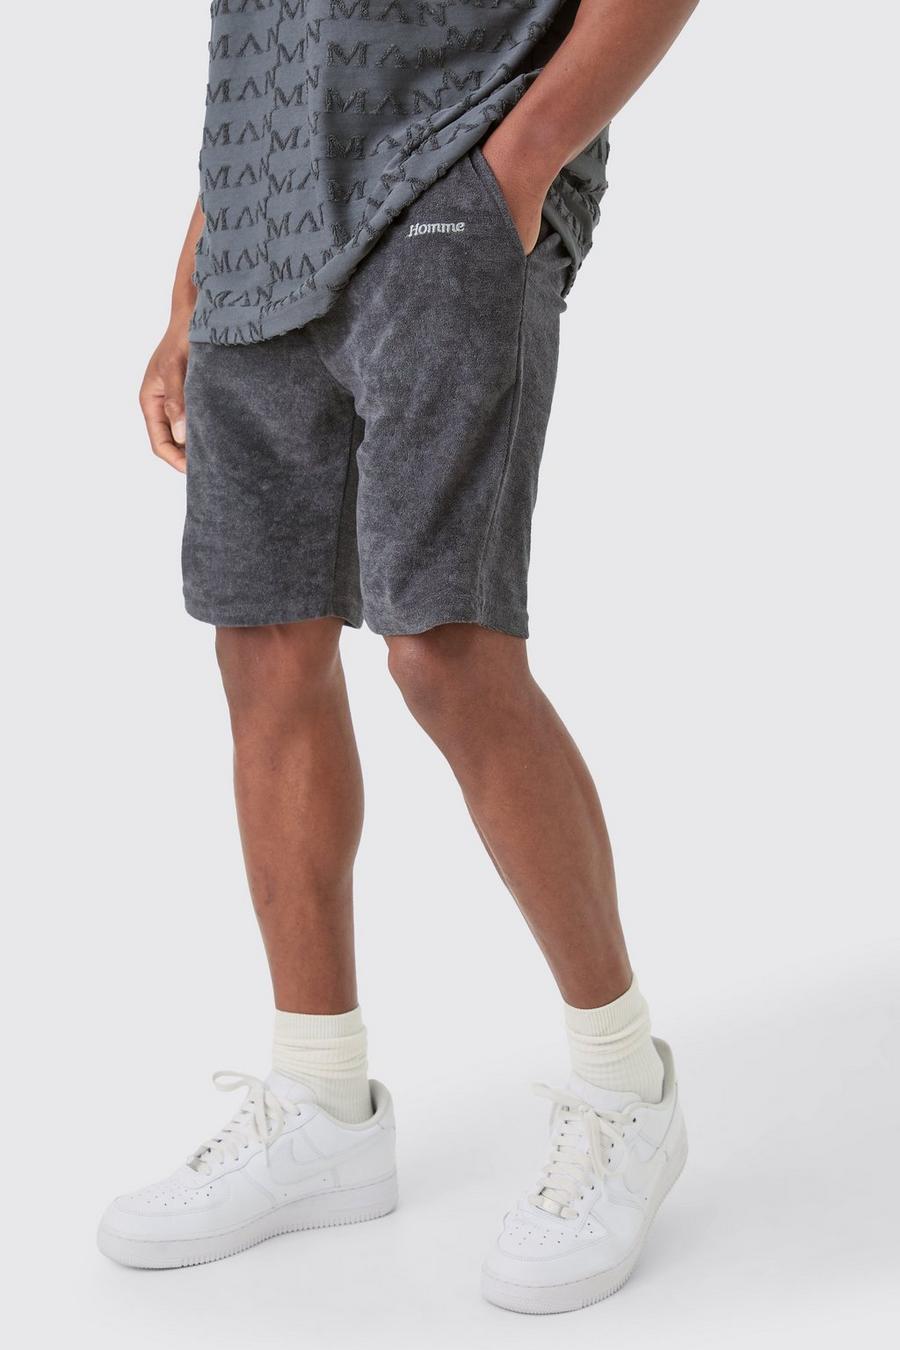 Lockere Frottee Homme Shorts, Charcoal